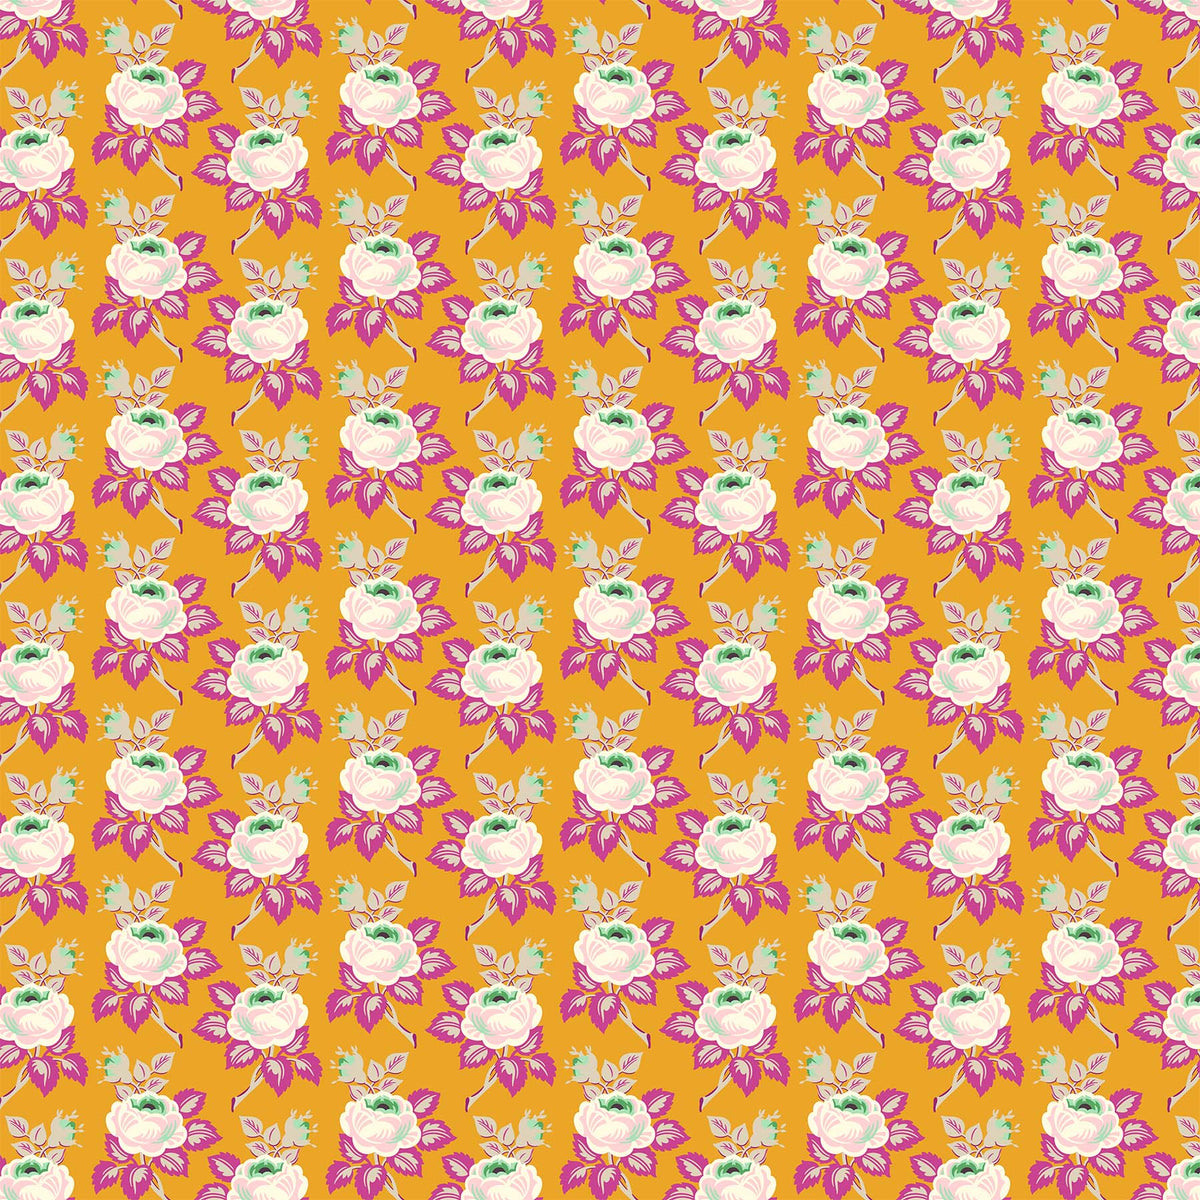 Local Honey Quilt Fabric - Sweet Roses in Honey Gold - 90661-55